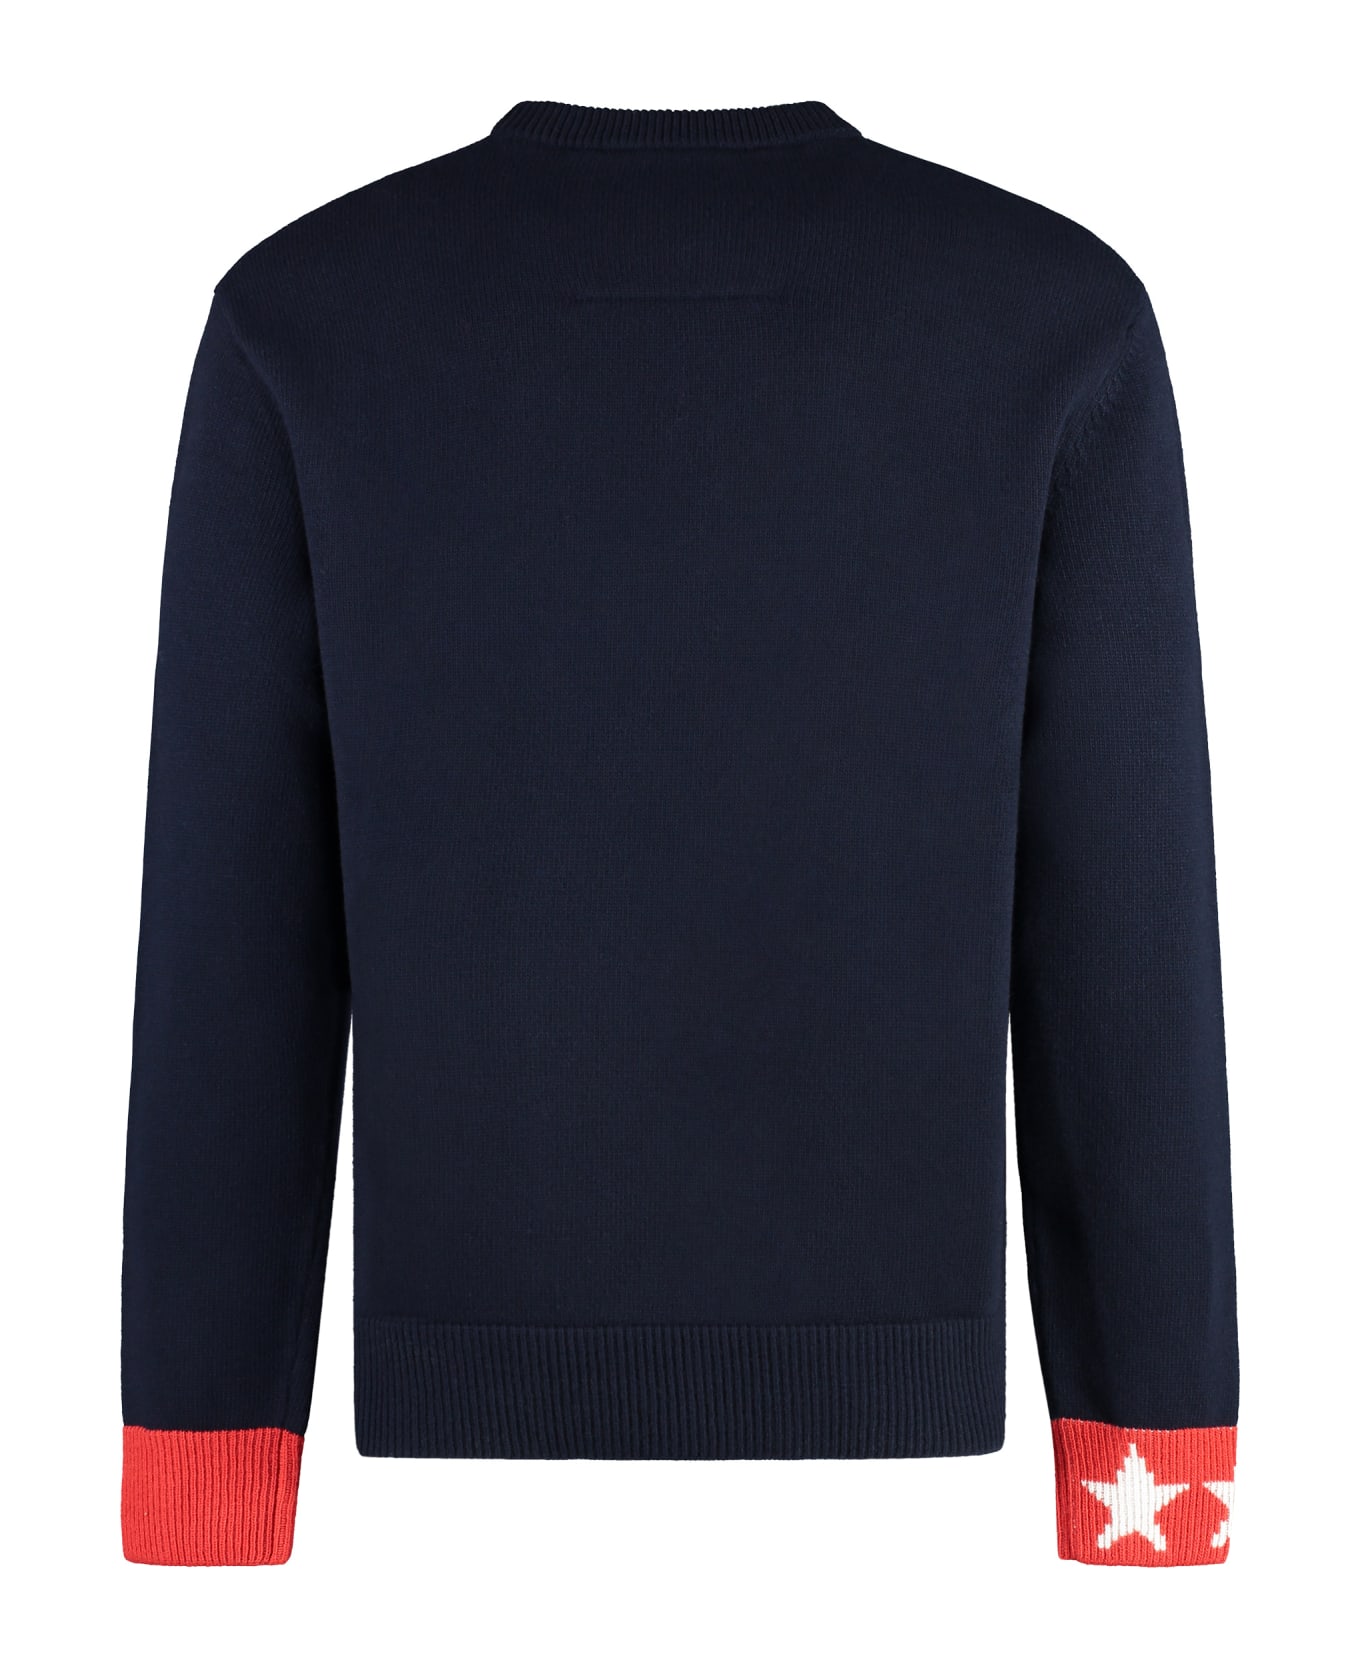 Givenchy Crew-neck Wool Sweater - blue